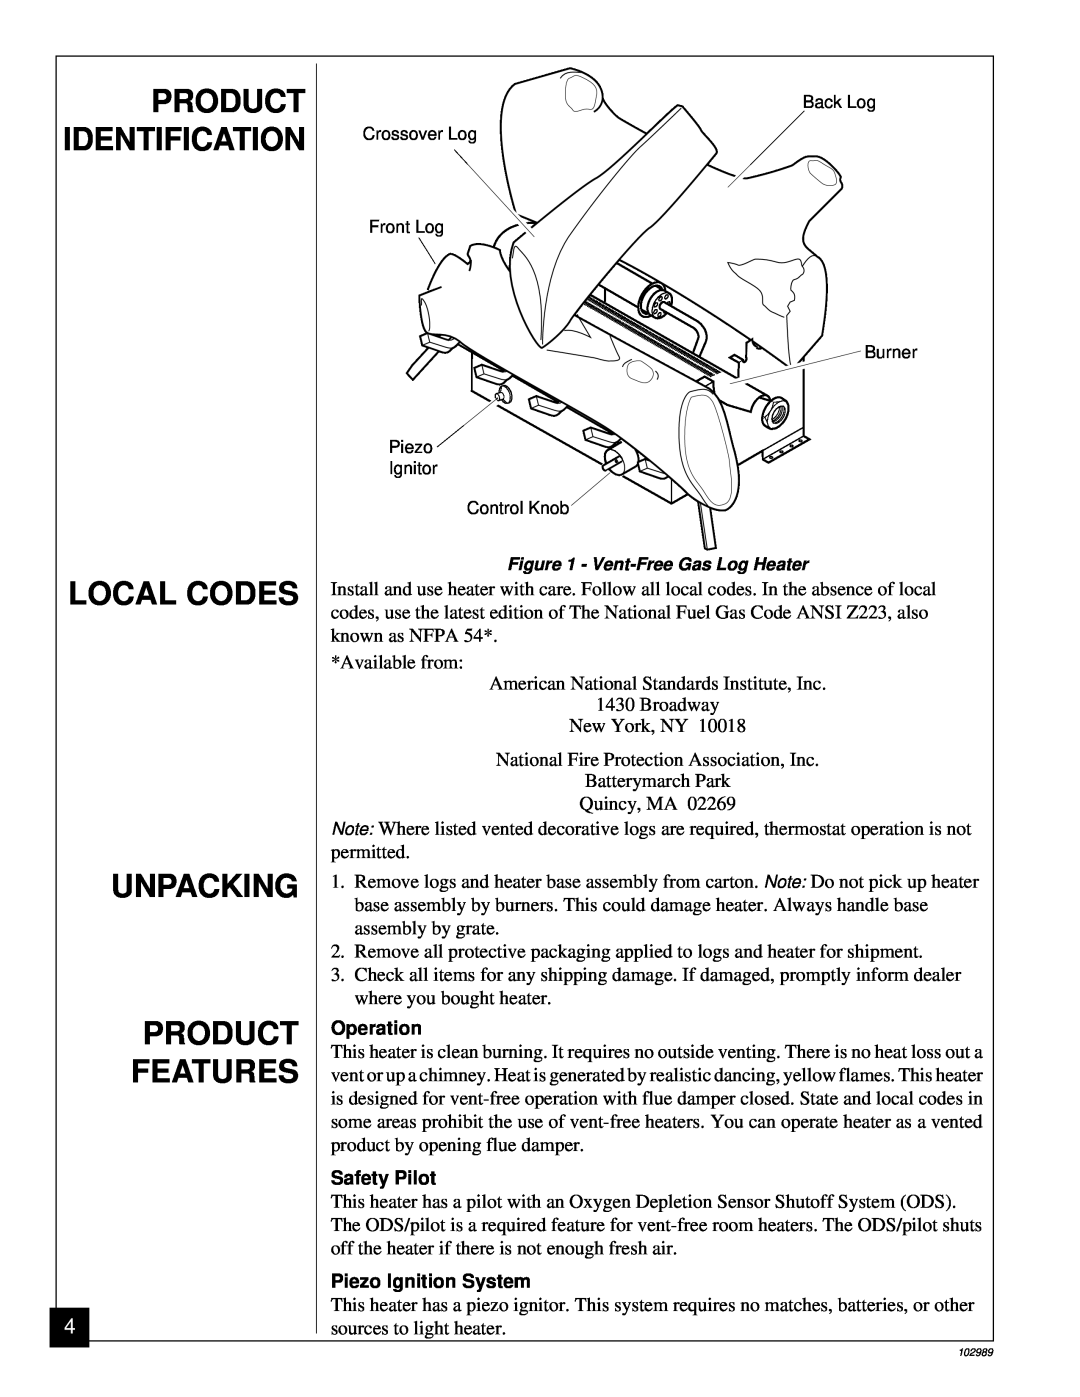 Desa CGS2718P installation manual Local Codes Unpacking Product Features, Product Identification 